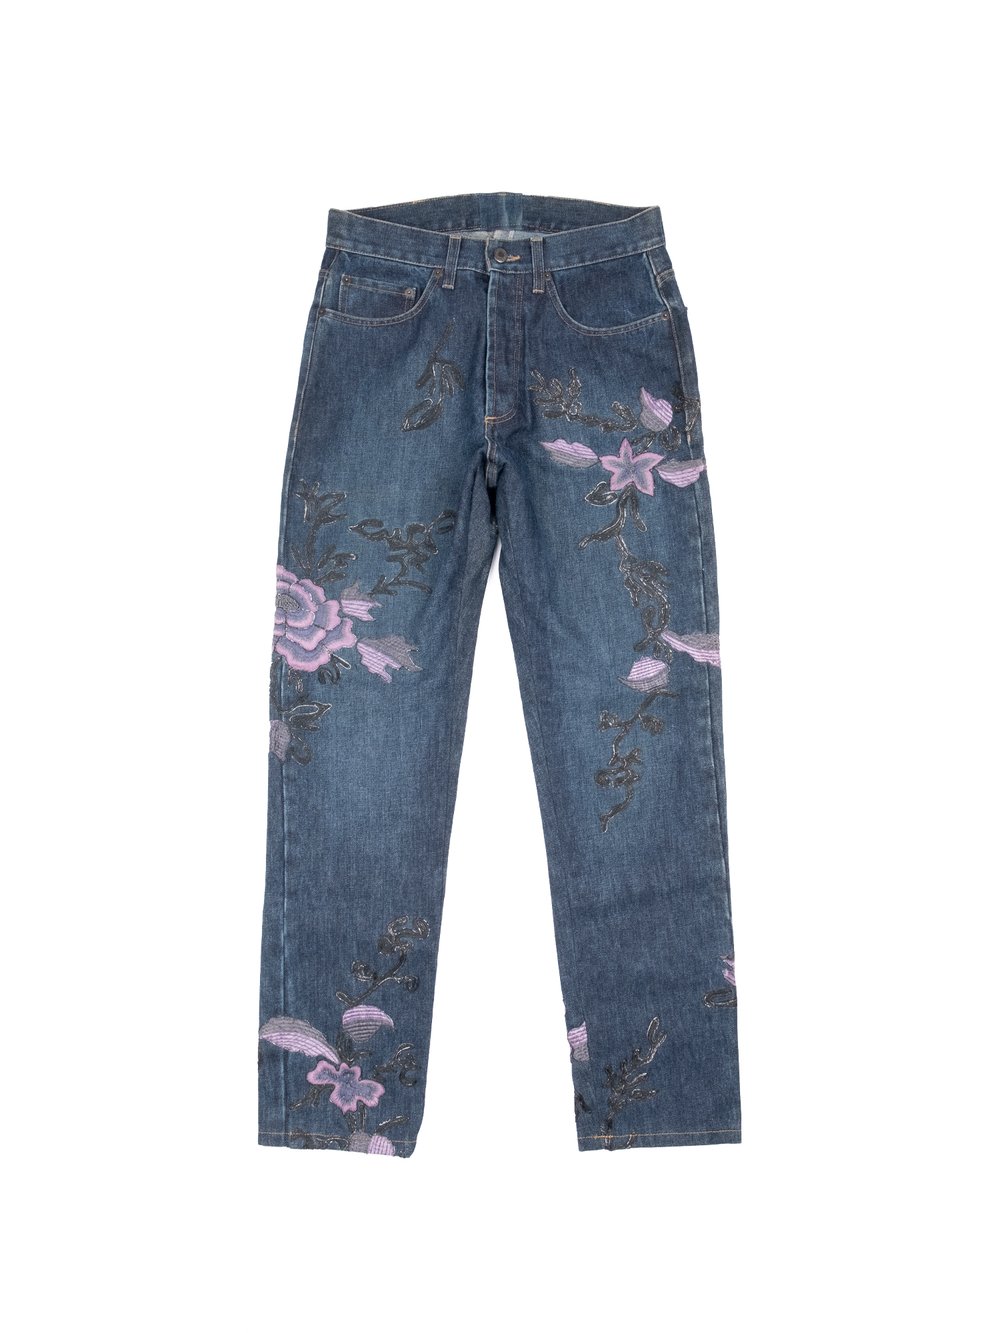 Gucci by Tom Ford AW1999 Embroidered Floral Denim